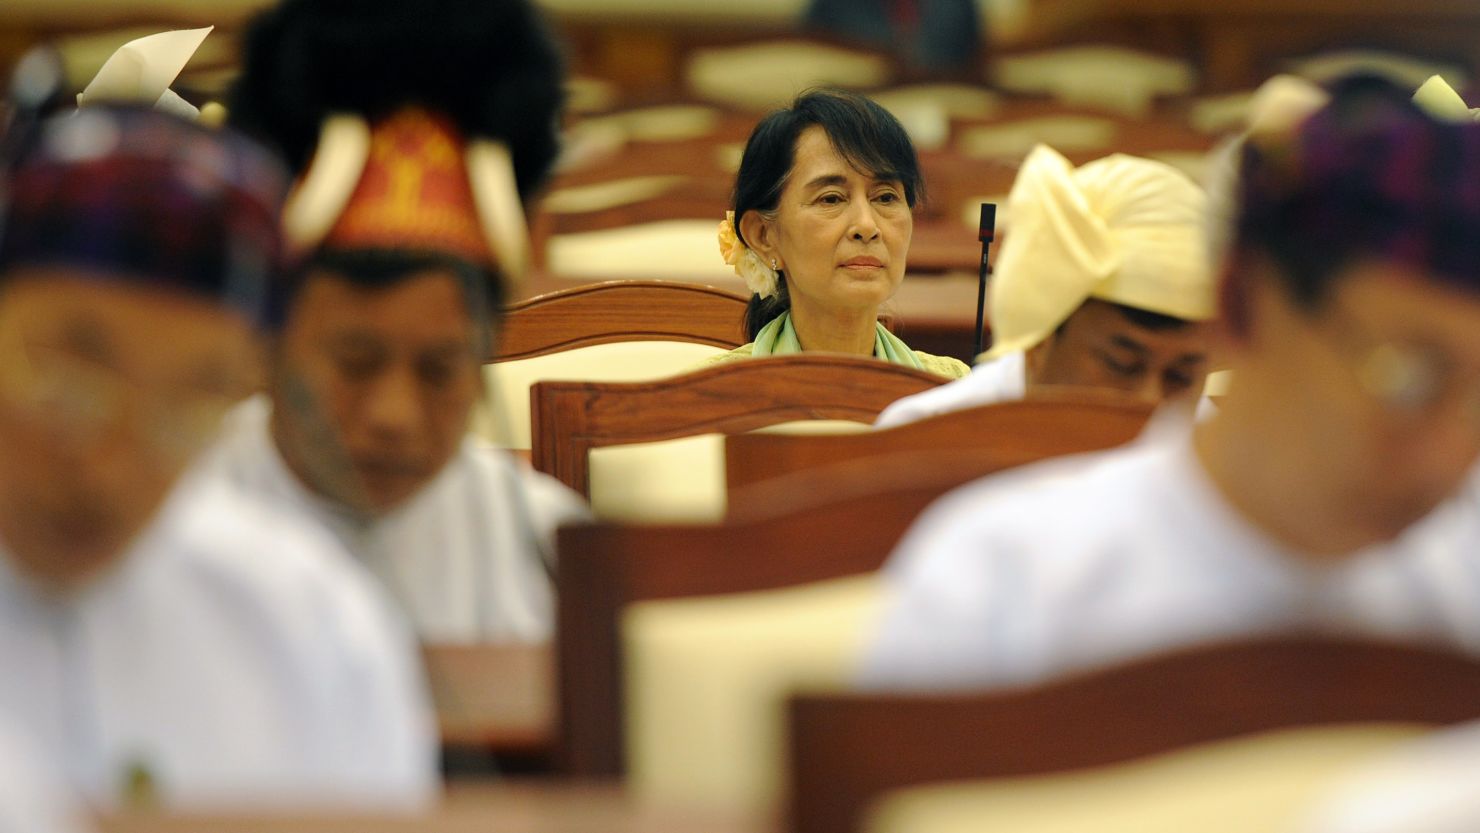 Aung San Suu Kyi sits in Myanmar's parliament this summer. Many say she cannot bring progress to her country by herself.